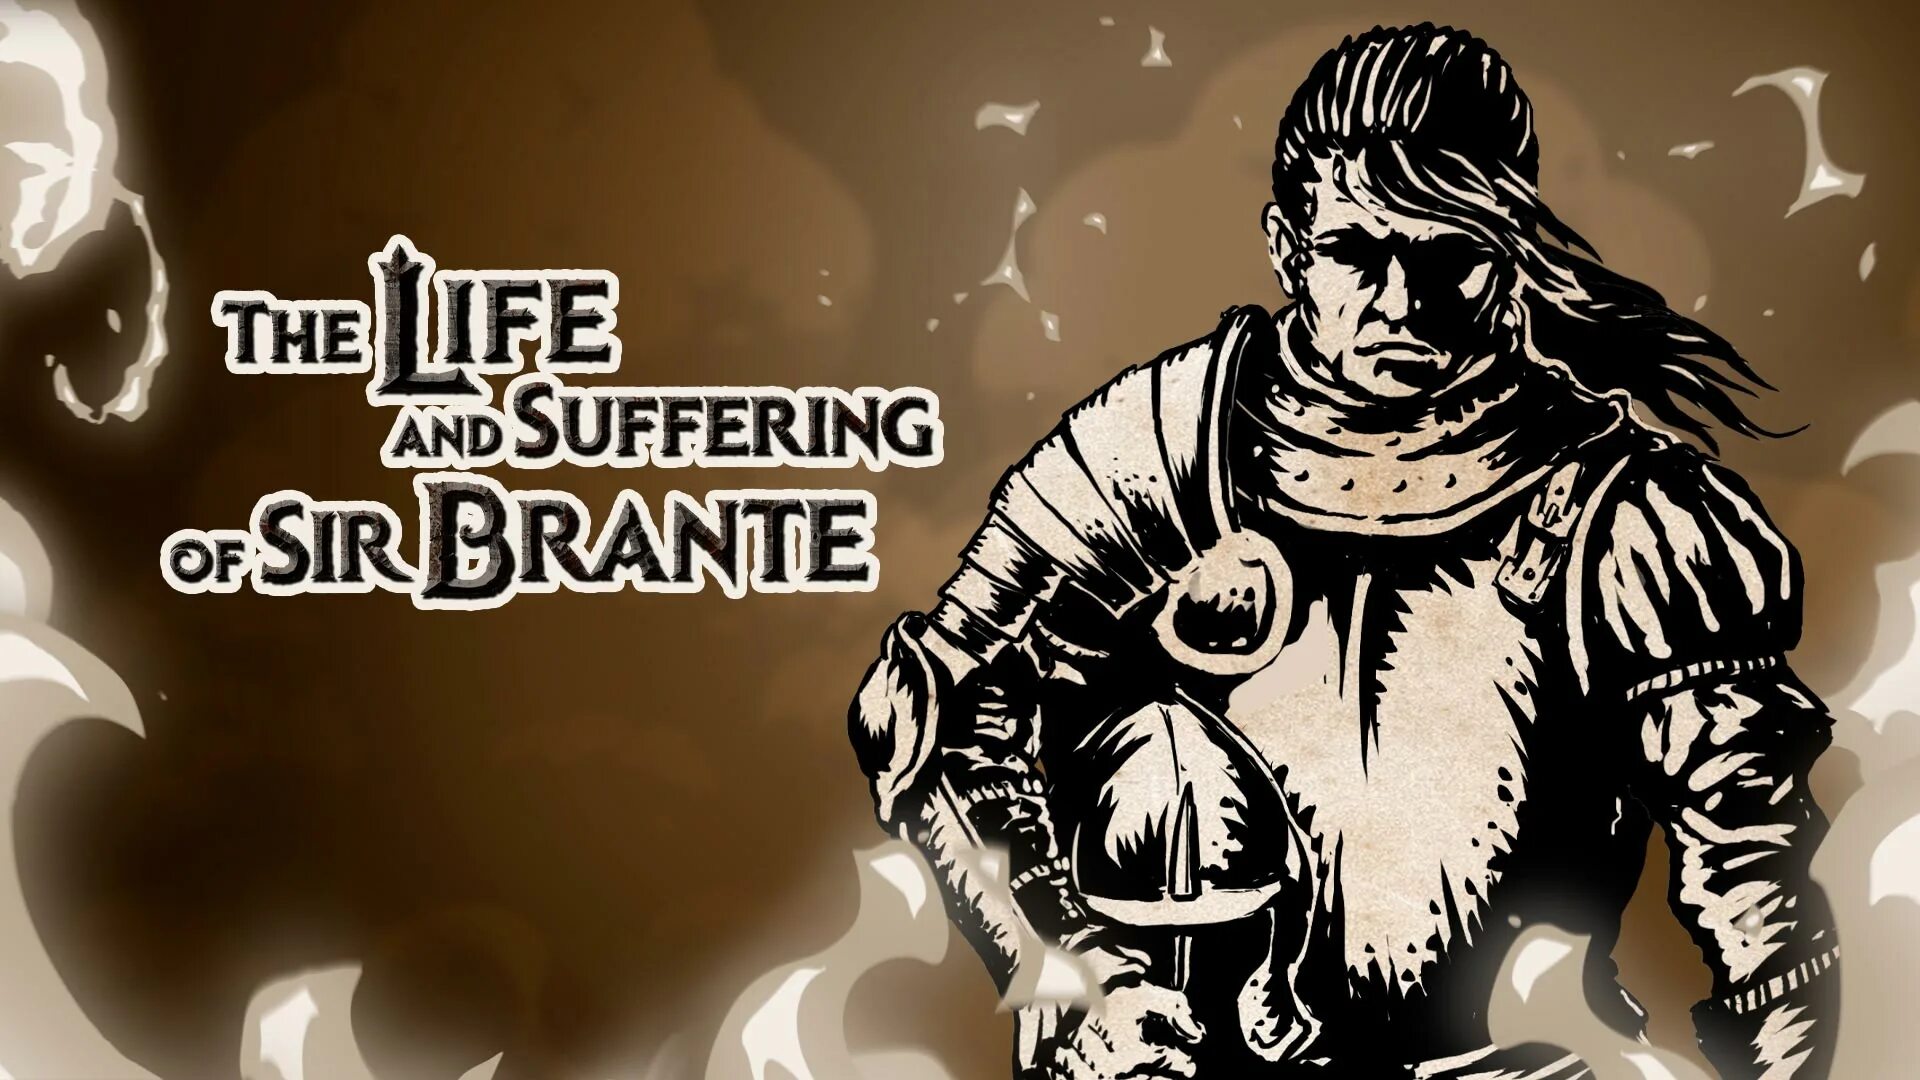 Life is suffering. The Life and suffering of Sir Brante. Сэр Брант игра. The Life and suffering of Sir Brante арты. Life and suffering of Sir Brante дворянин.